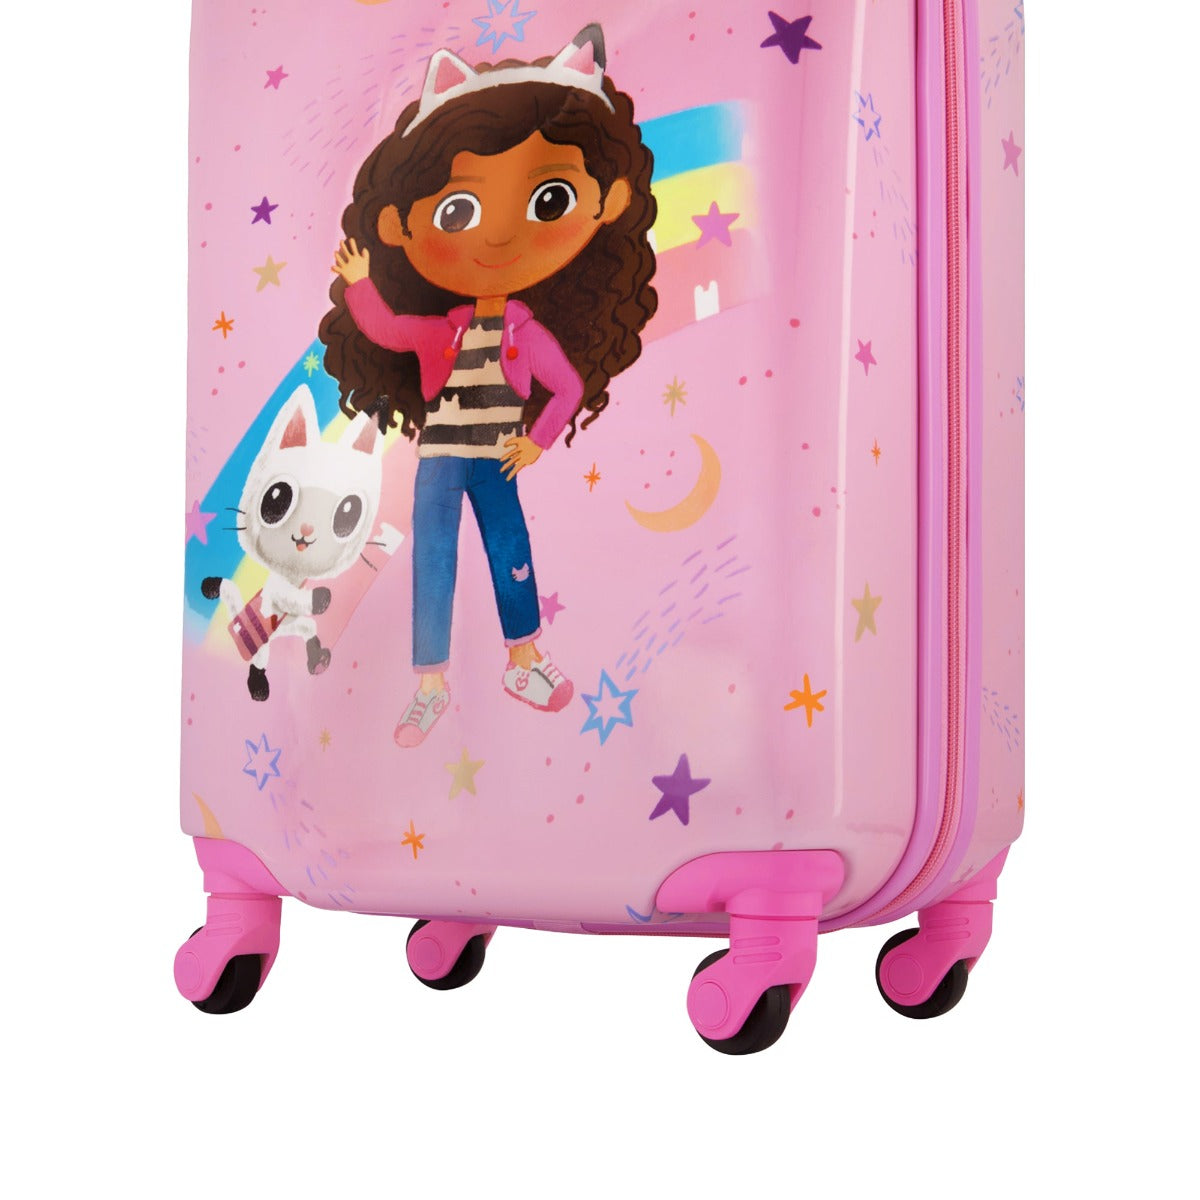 Gabby's Dollhouse sketch your dreams matching 2 piece set - kids 21 inch carry-on spinner suitcase for travel